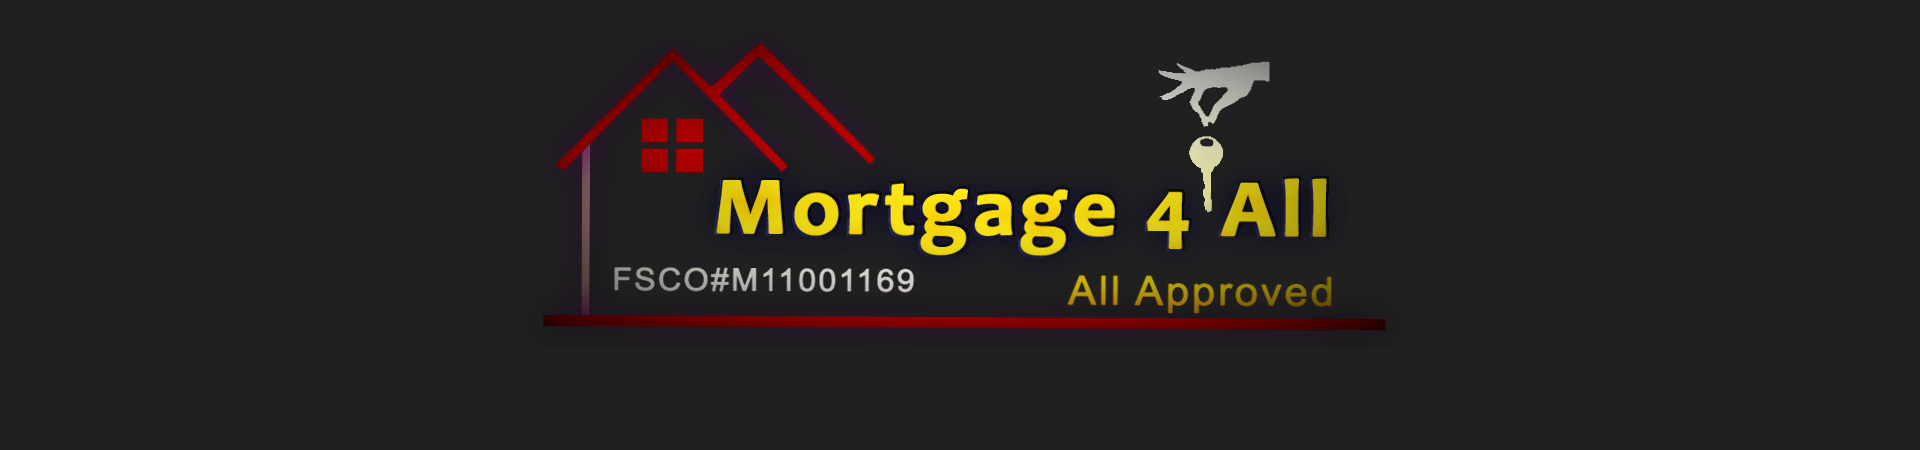 Mortgage4all